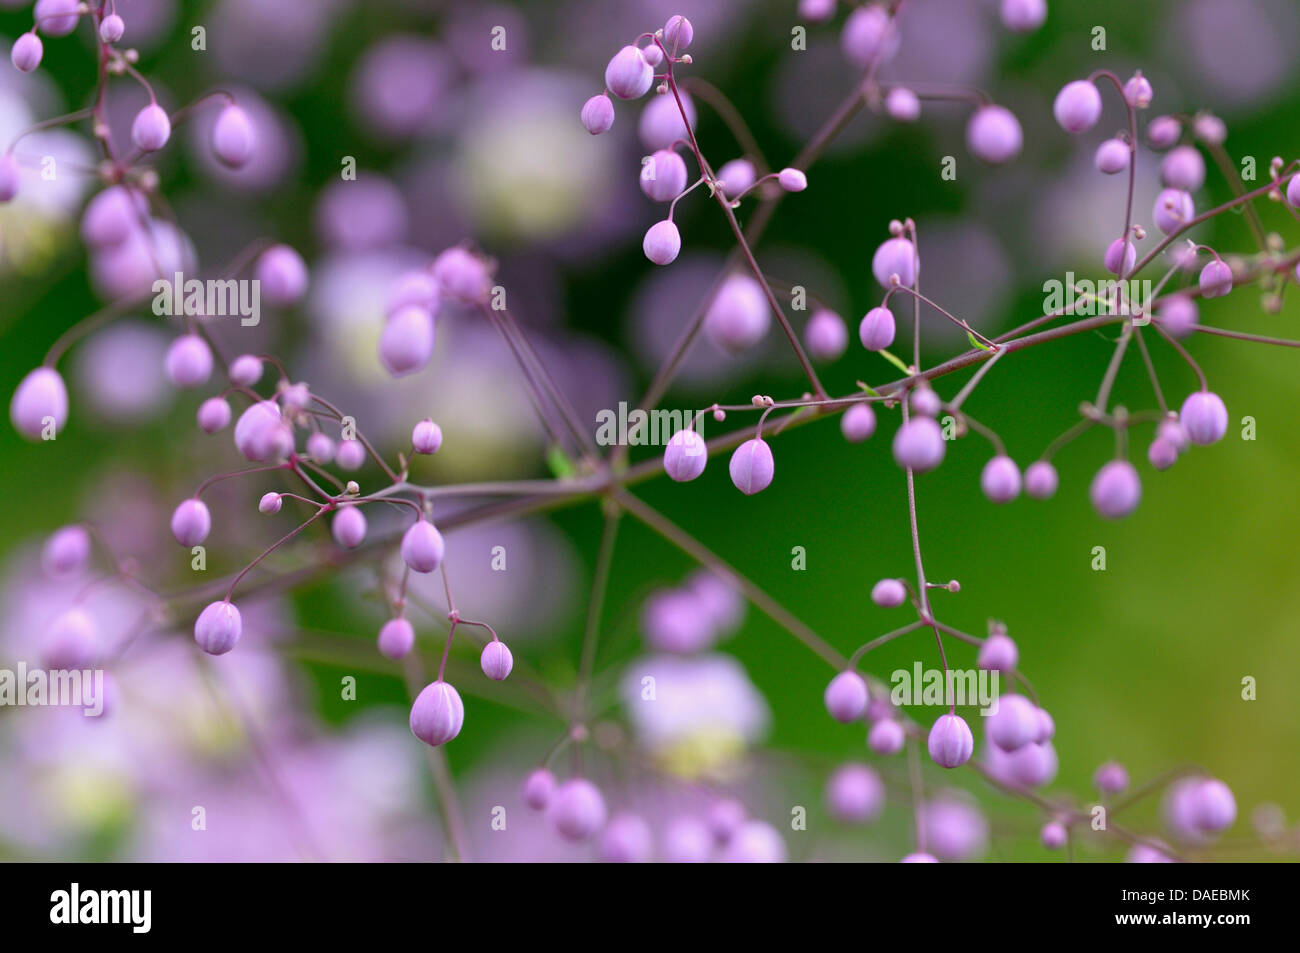 Chinese meadow rue (Thalictrum delavayi), flower buds Stock Photo